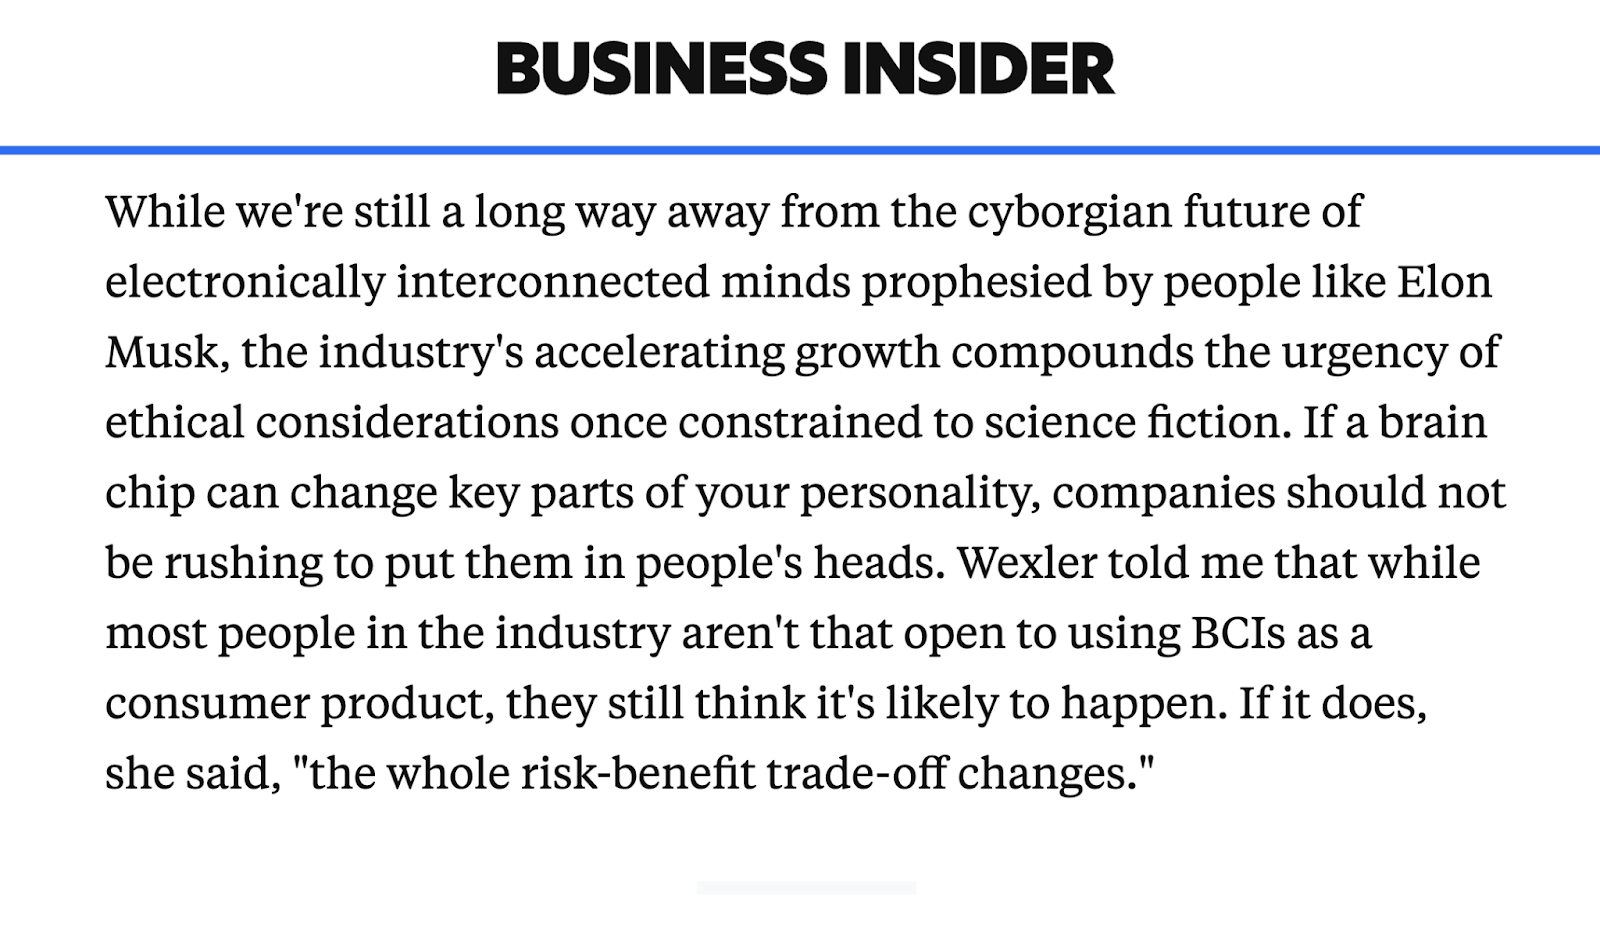 An example of a provocative conclusion from Business Insider's article on Elon Musk's Neuralink brain chip